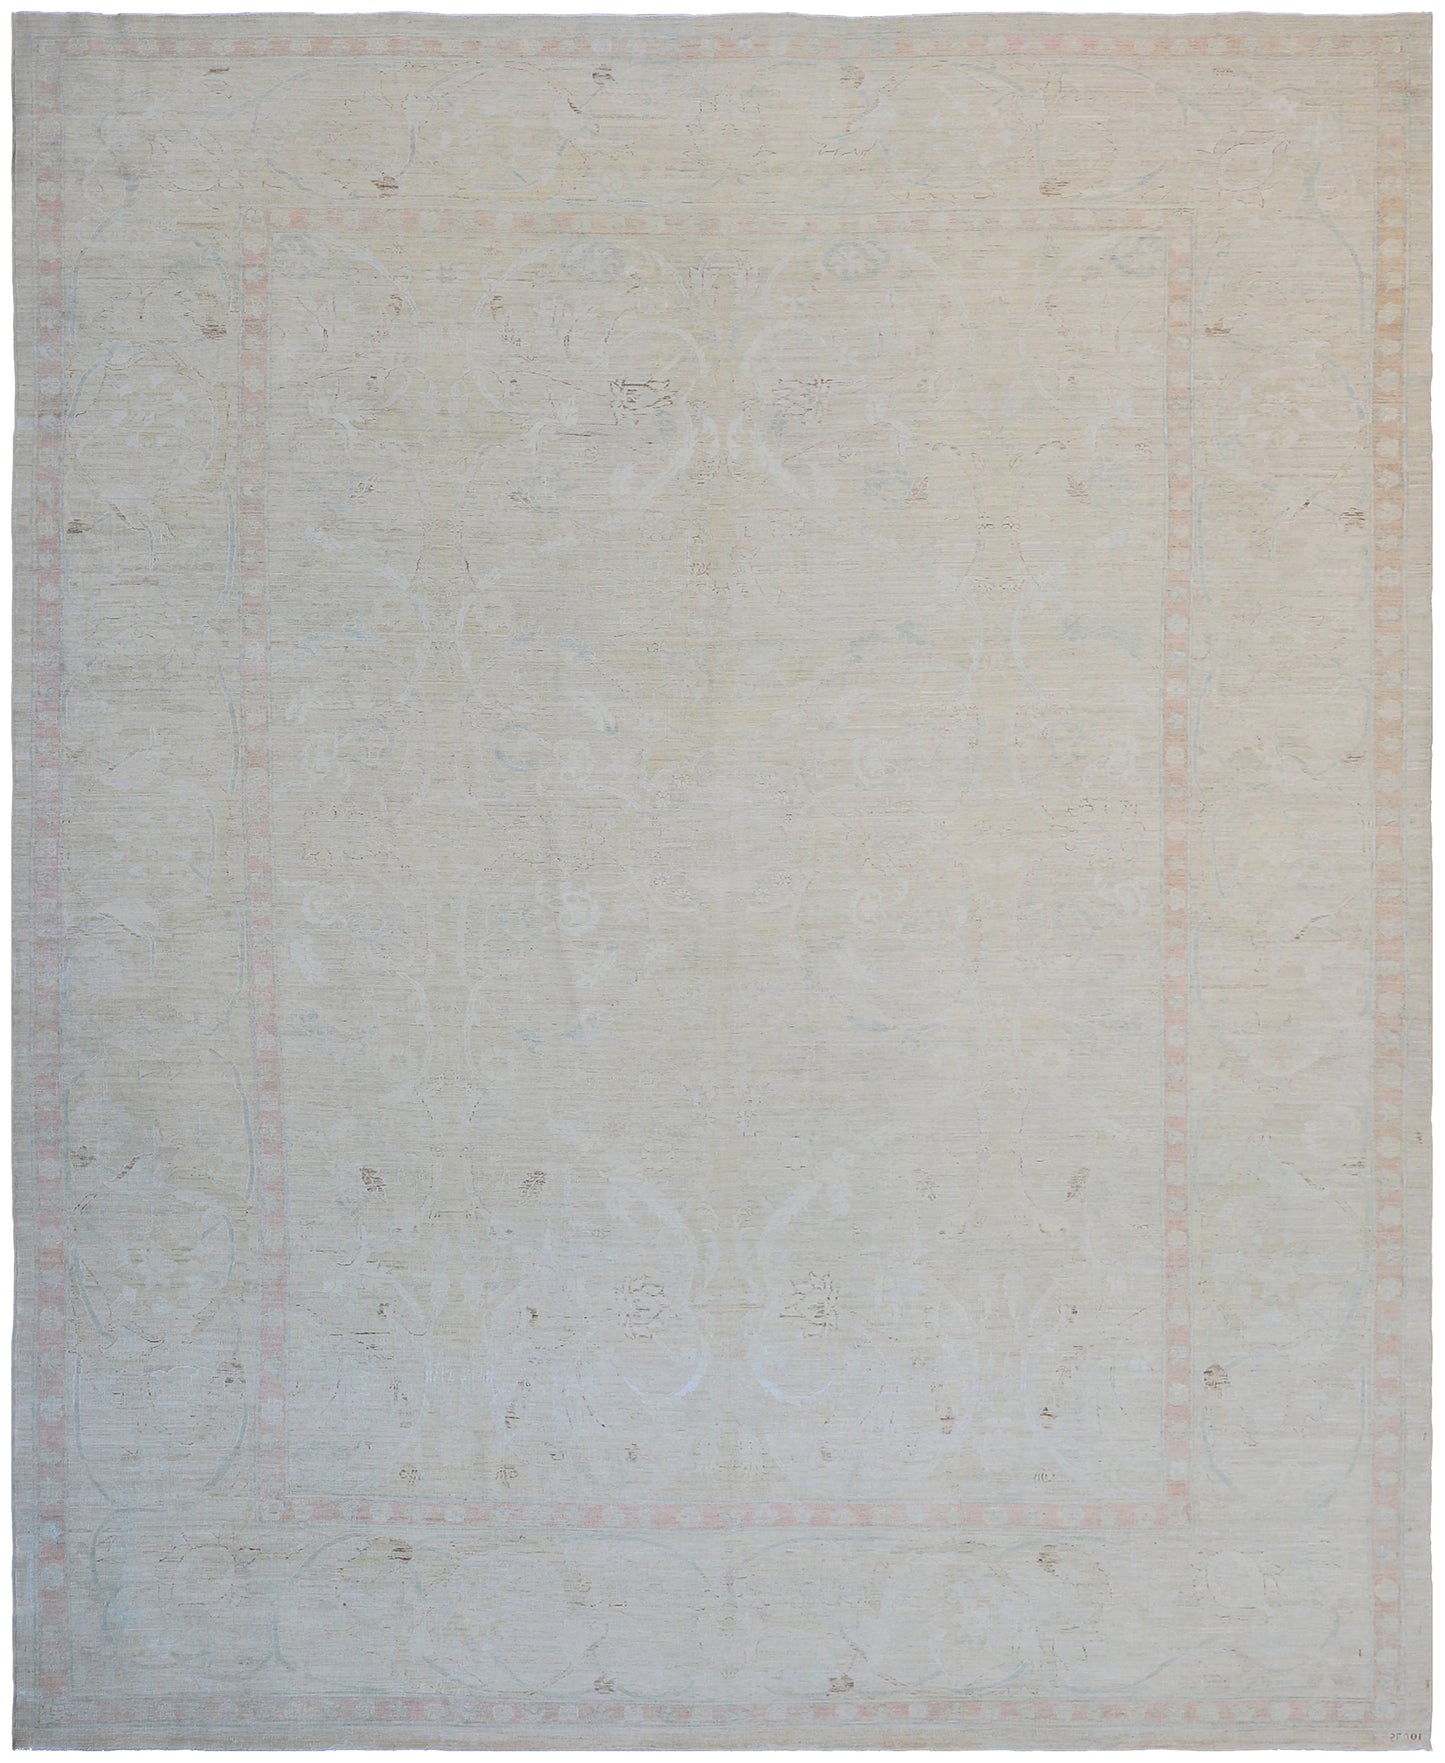 9'x12' Soft Faded Washed-out Colors Ariana Luxury Collection Rug